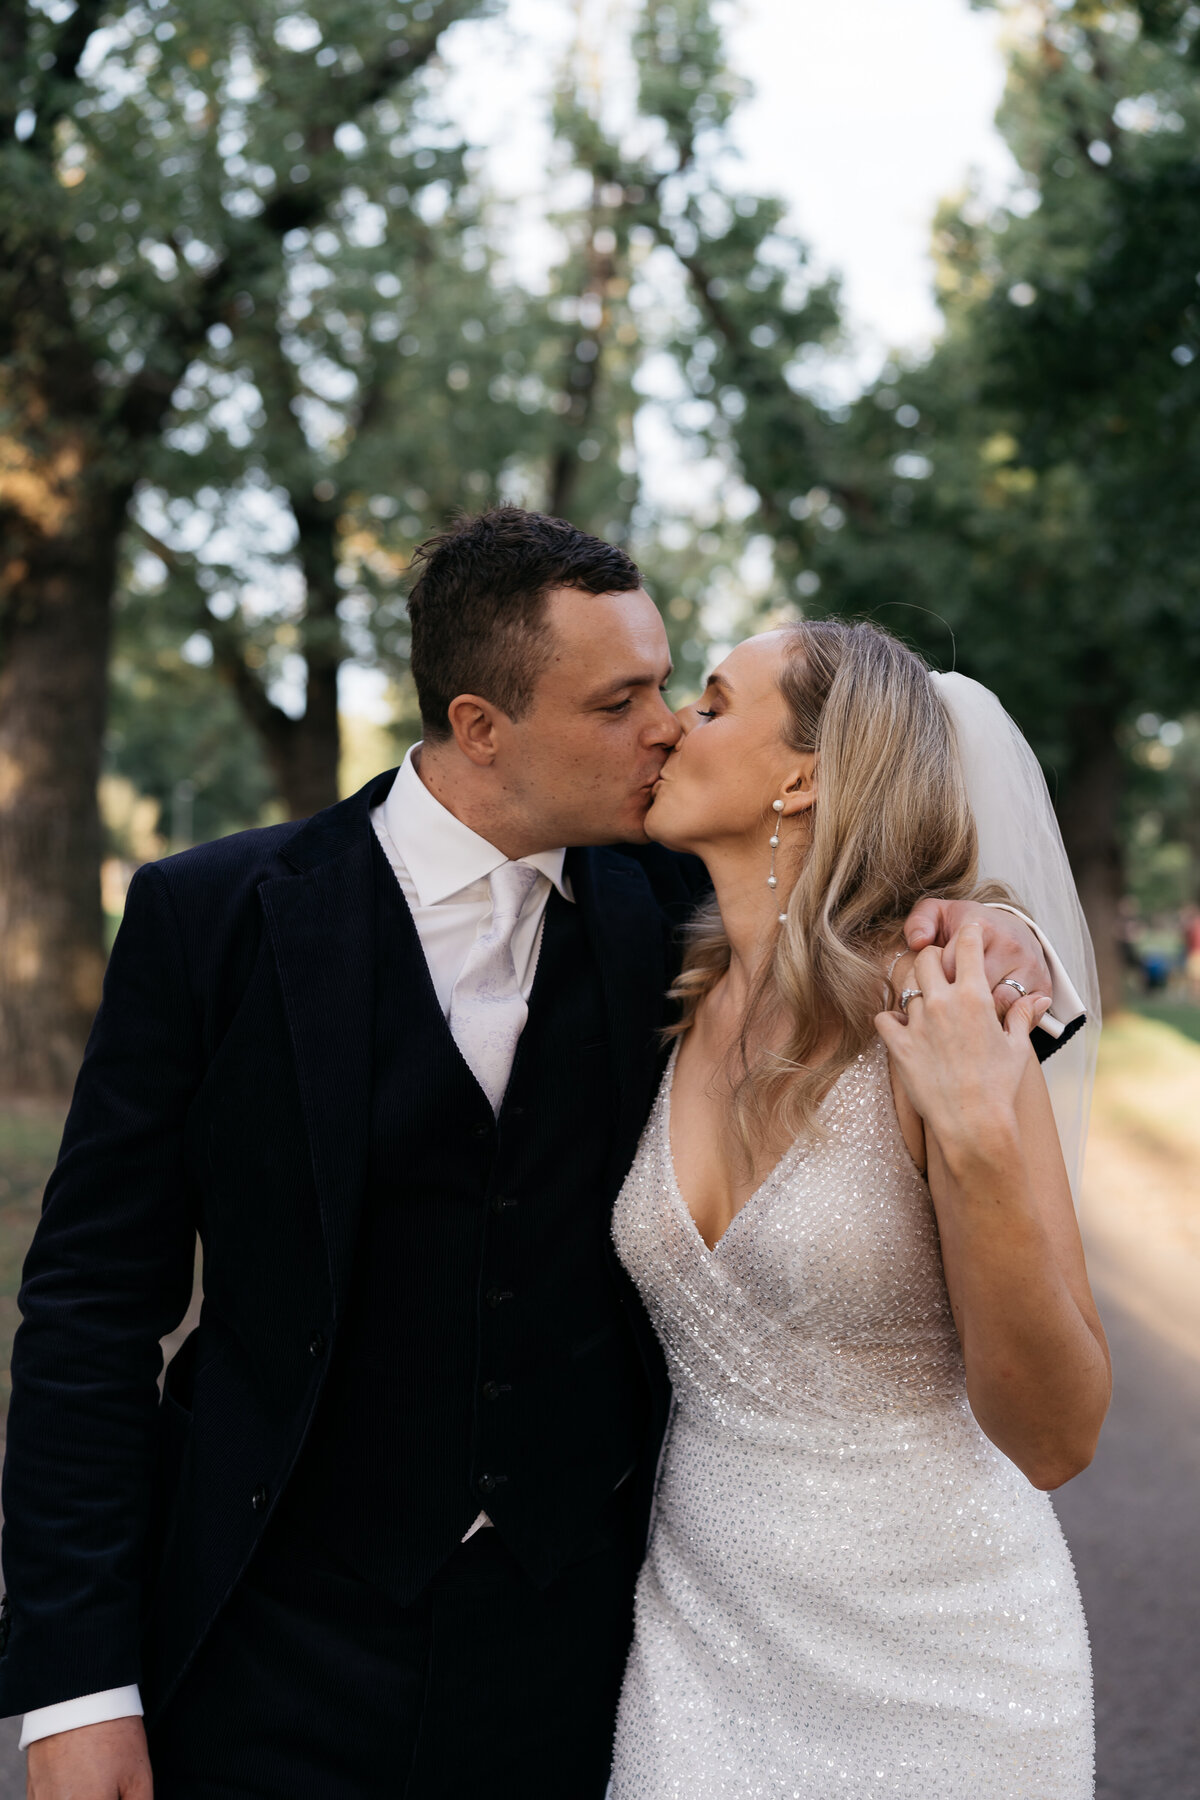 Courtney Laura Photography, Melbourne Wedding Photographer, Fitzroy Nth, 75 Reid St, Cath and Mitch-590